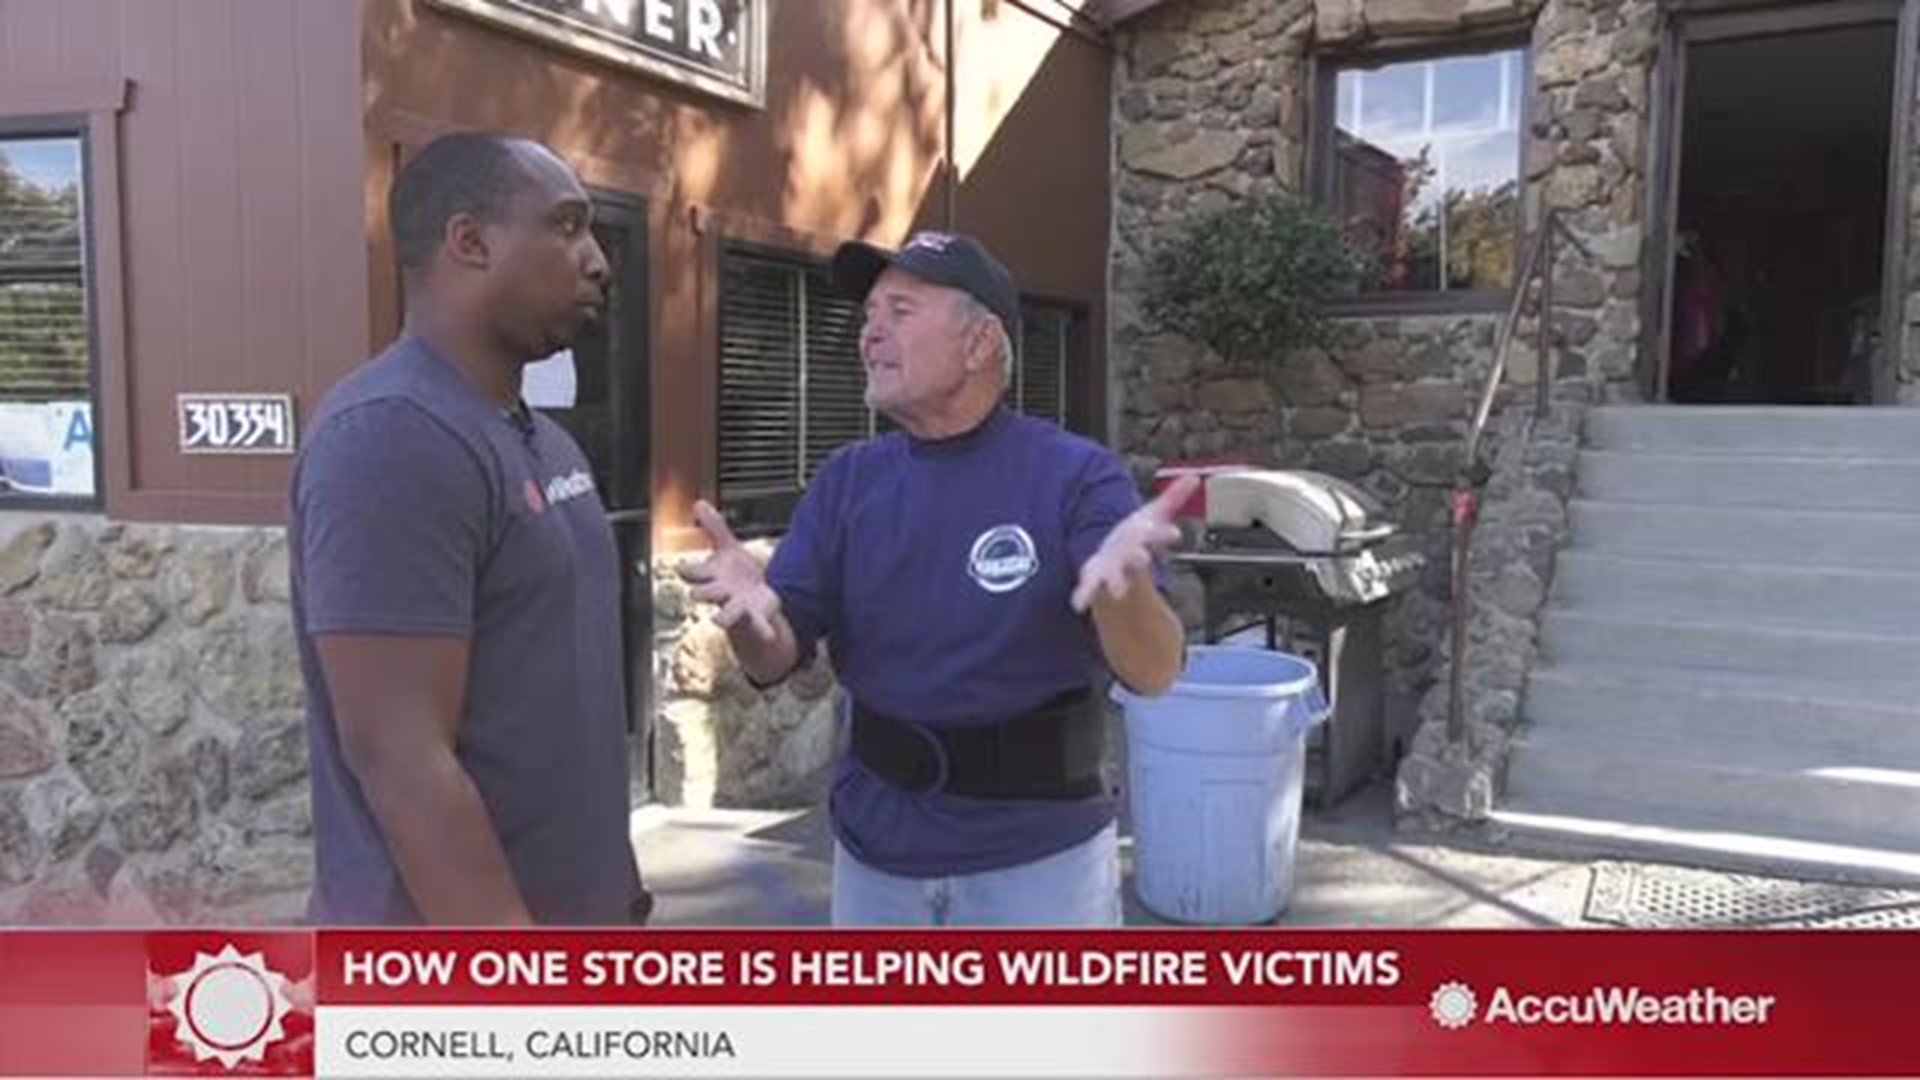 The Rock Store is the only establishment open to the community in Cornell, California after the Woolsey Fire.  The owner, Rich Savko, decided to open his doors to help victims after the wildfire.